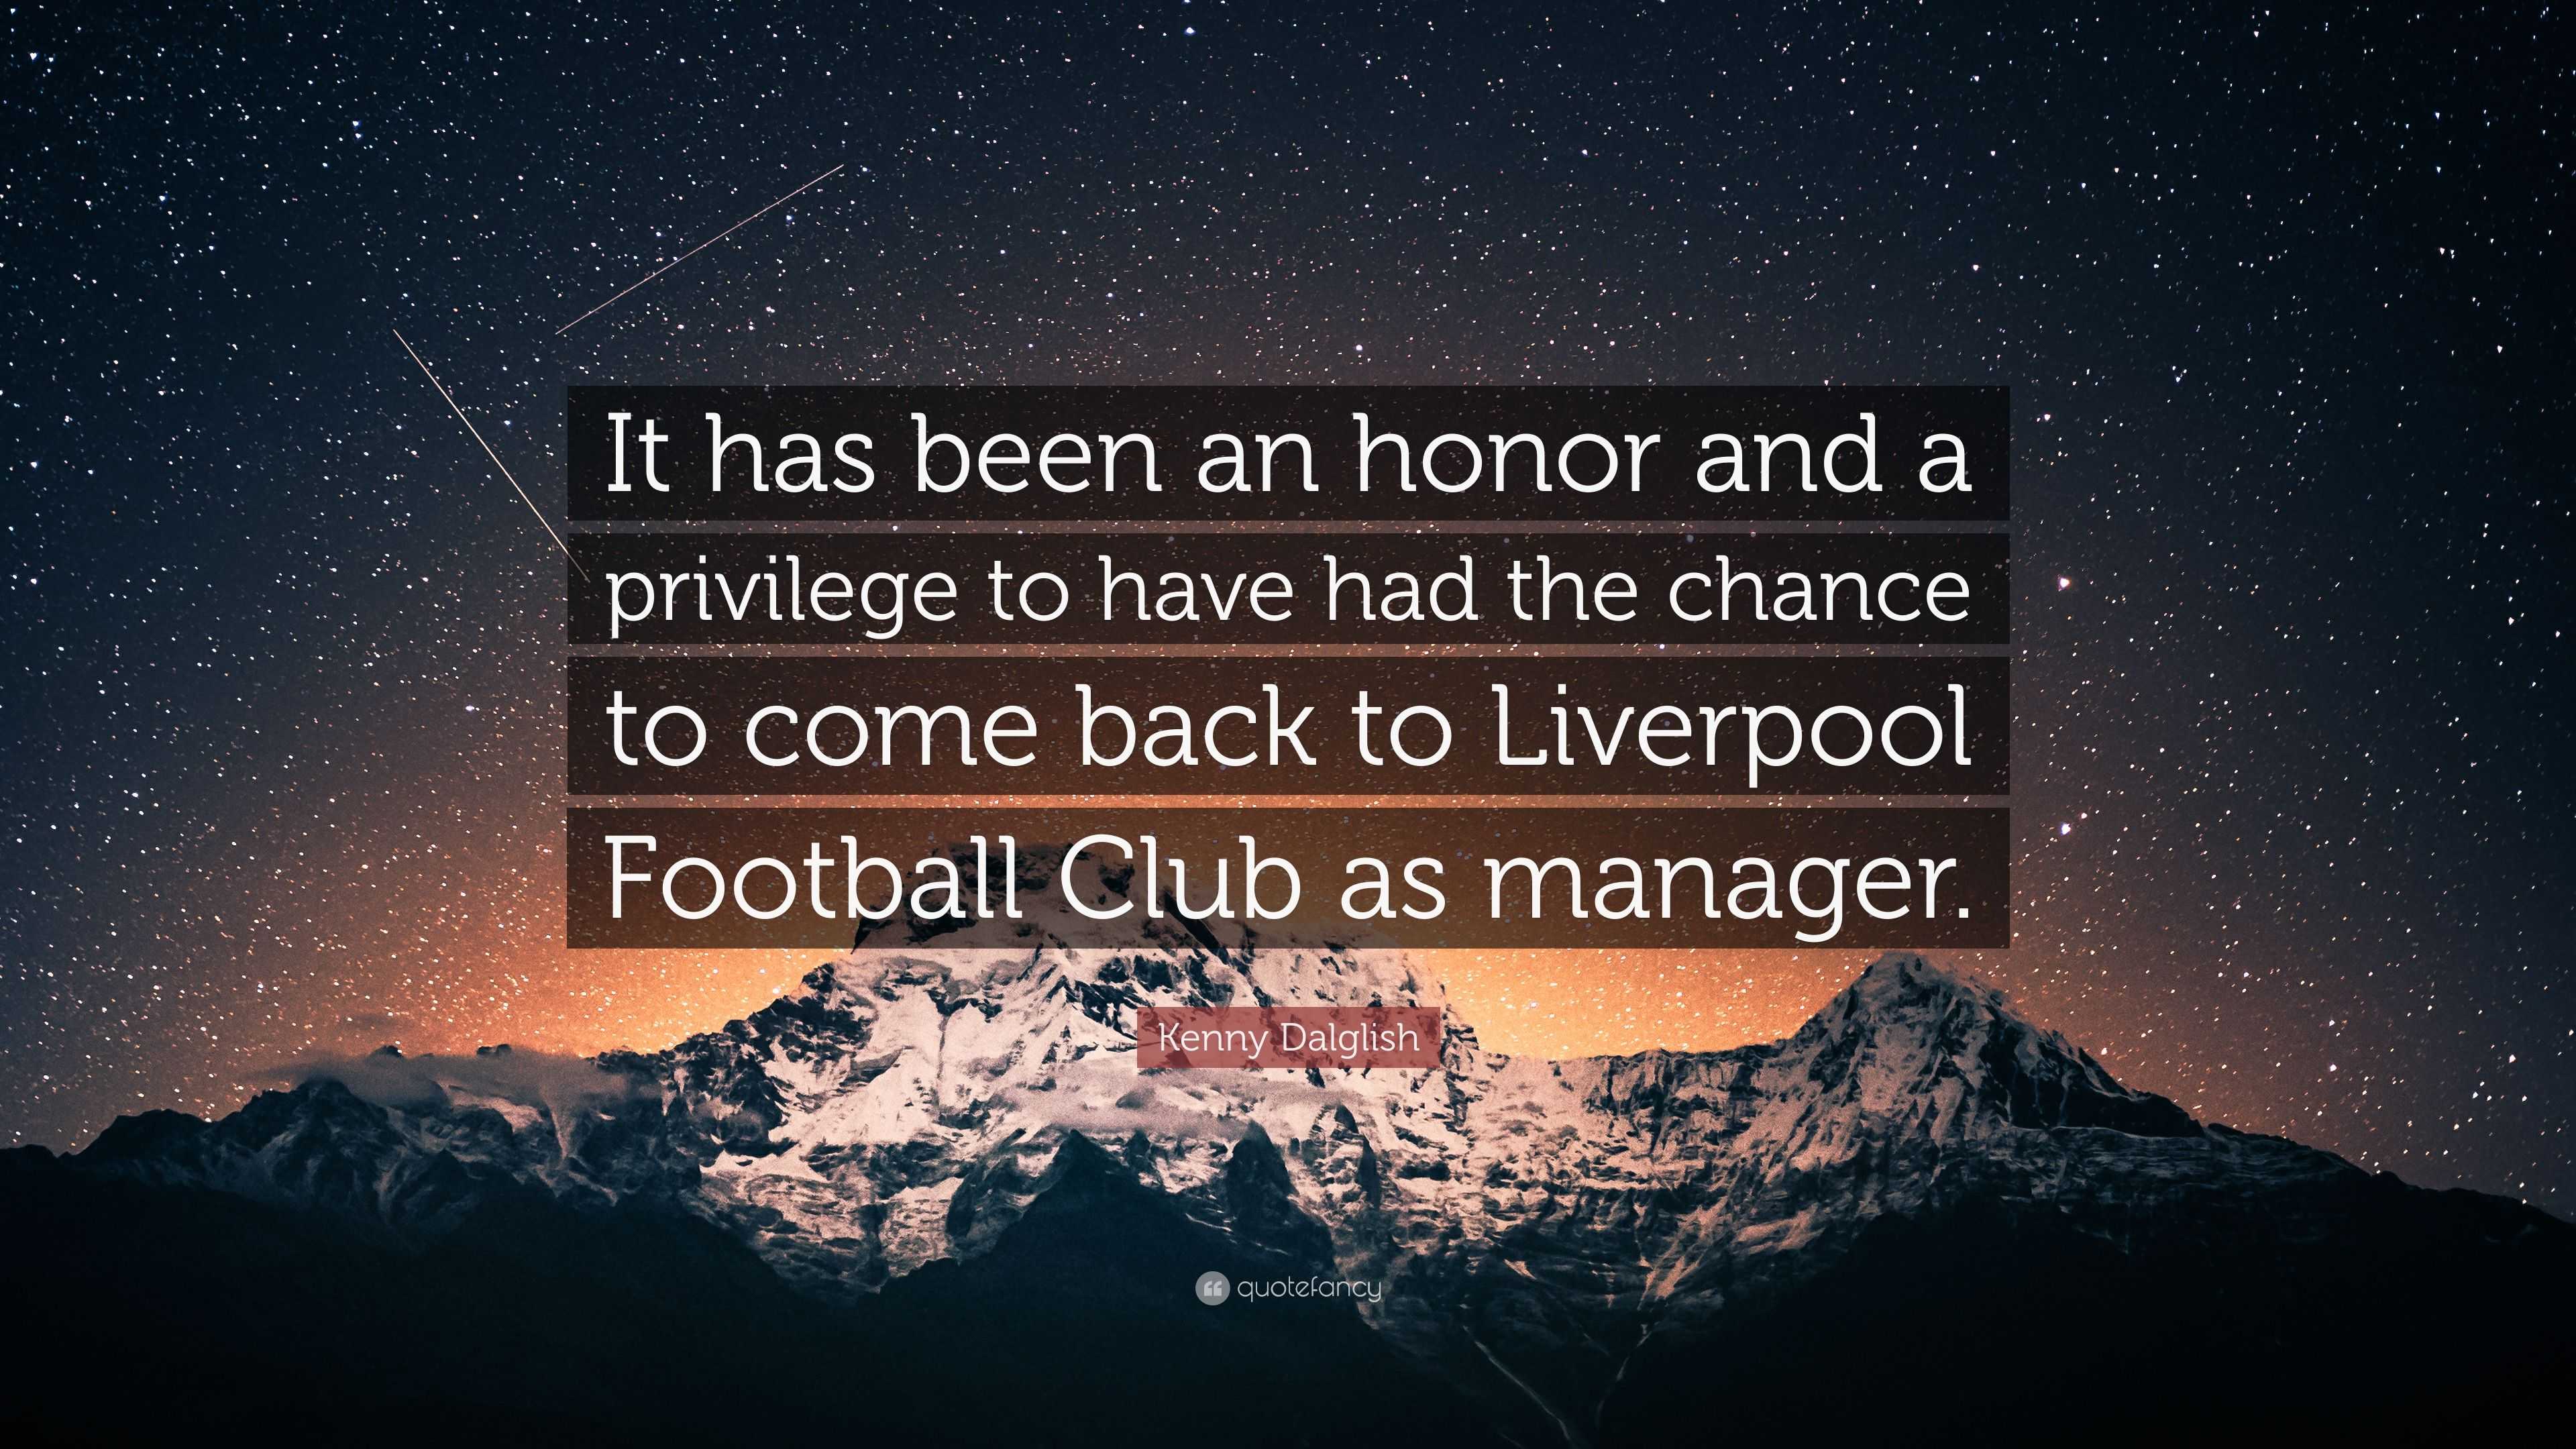 Kenny Dalglish Quote: “It has been an honor and a privilege to have had ...